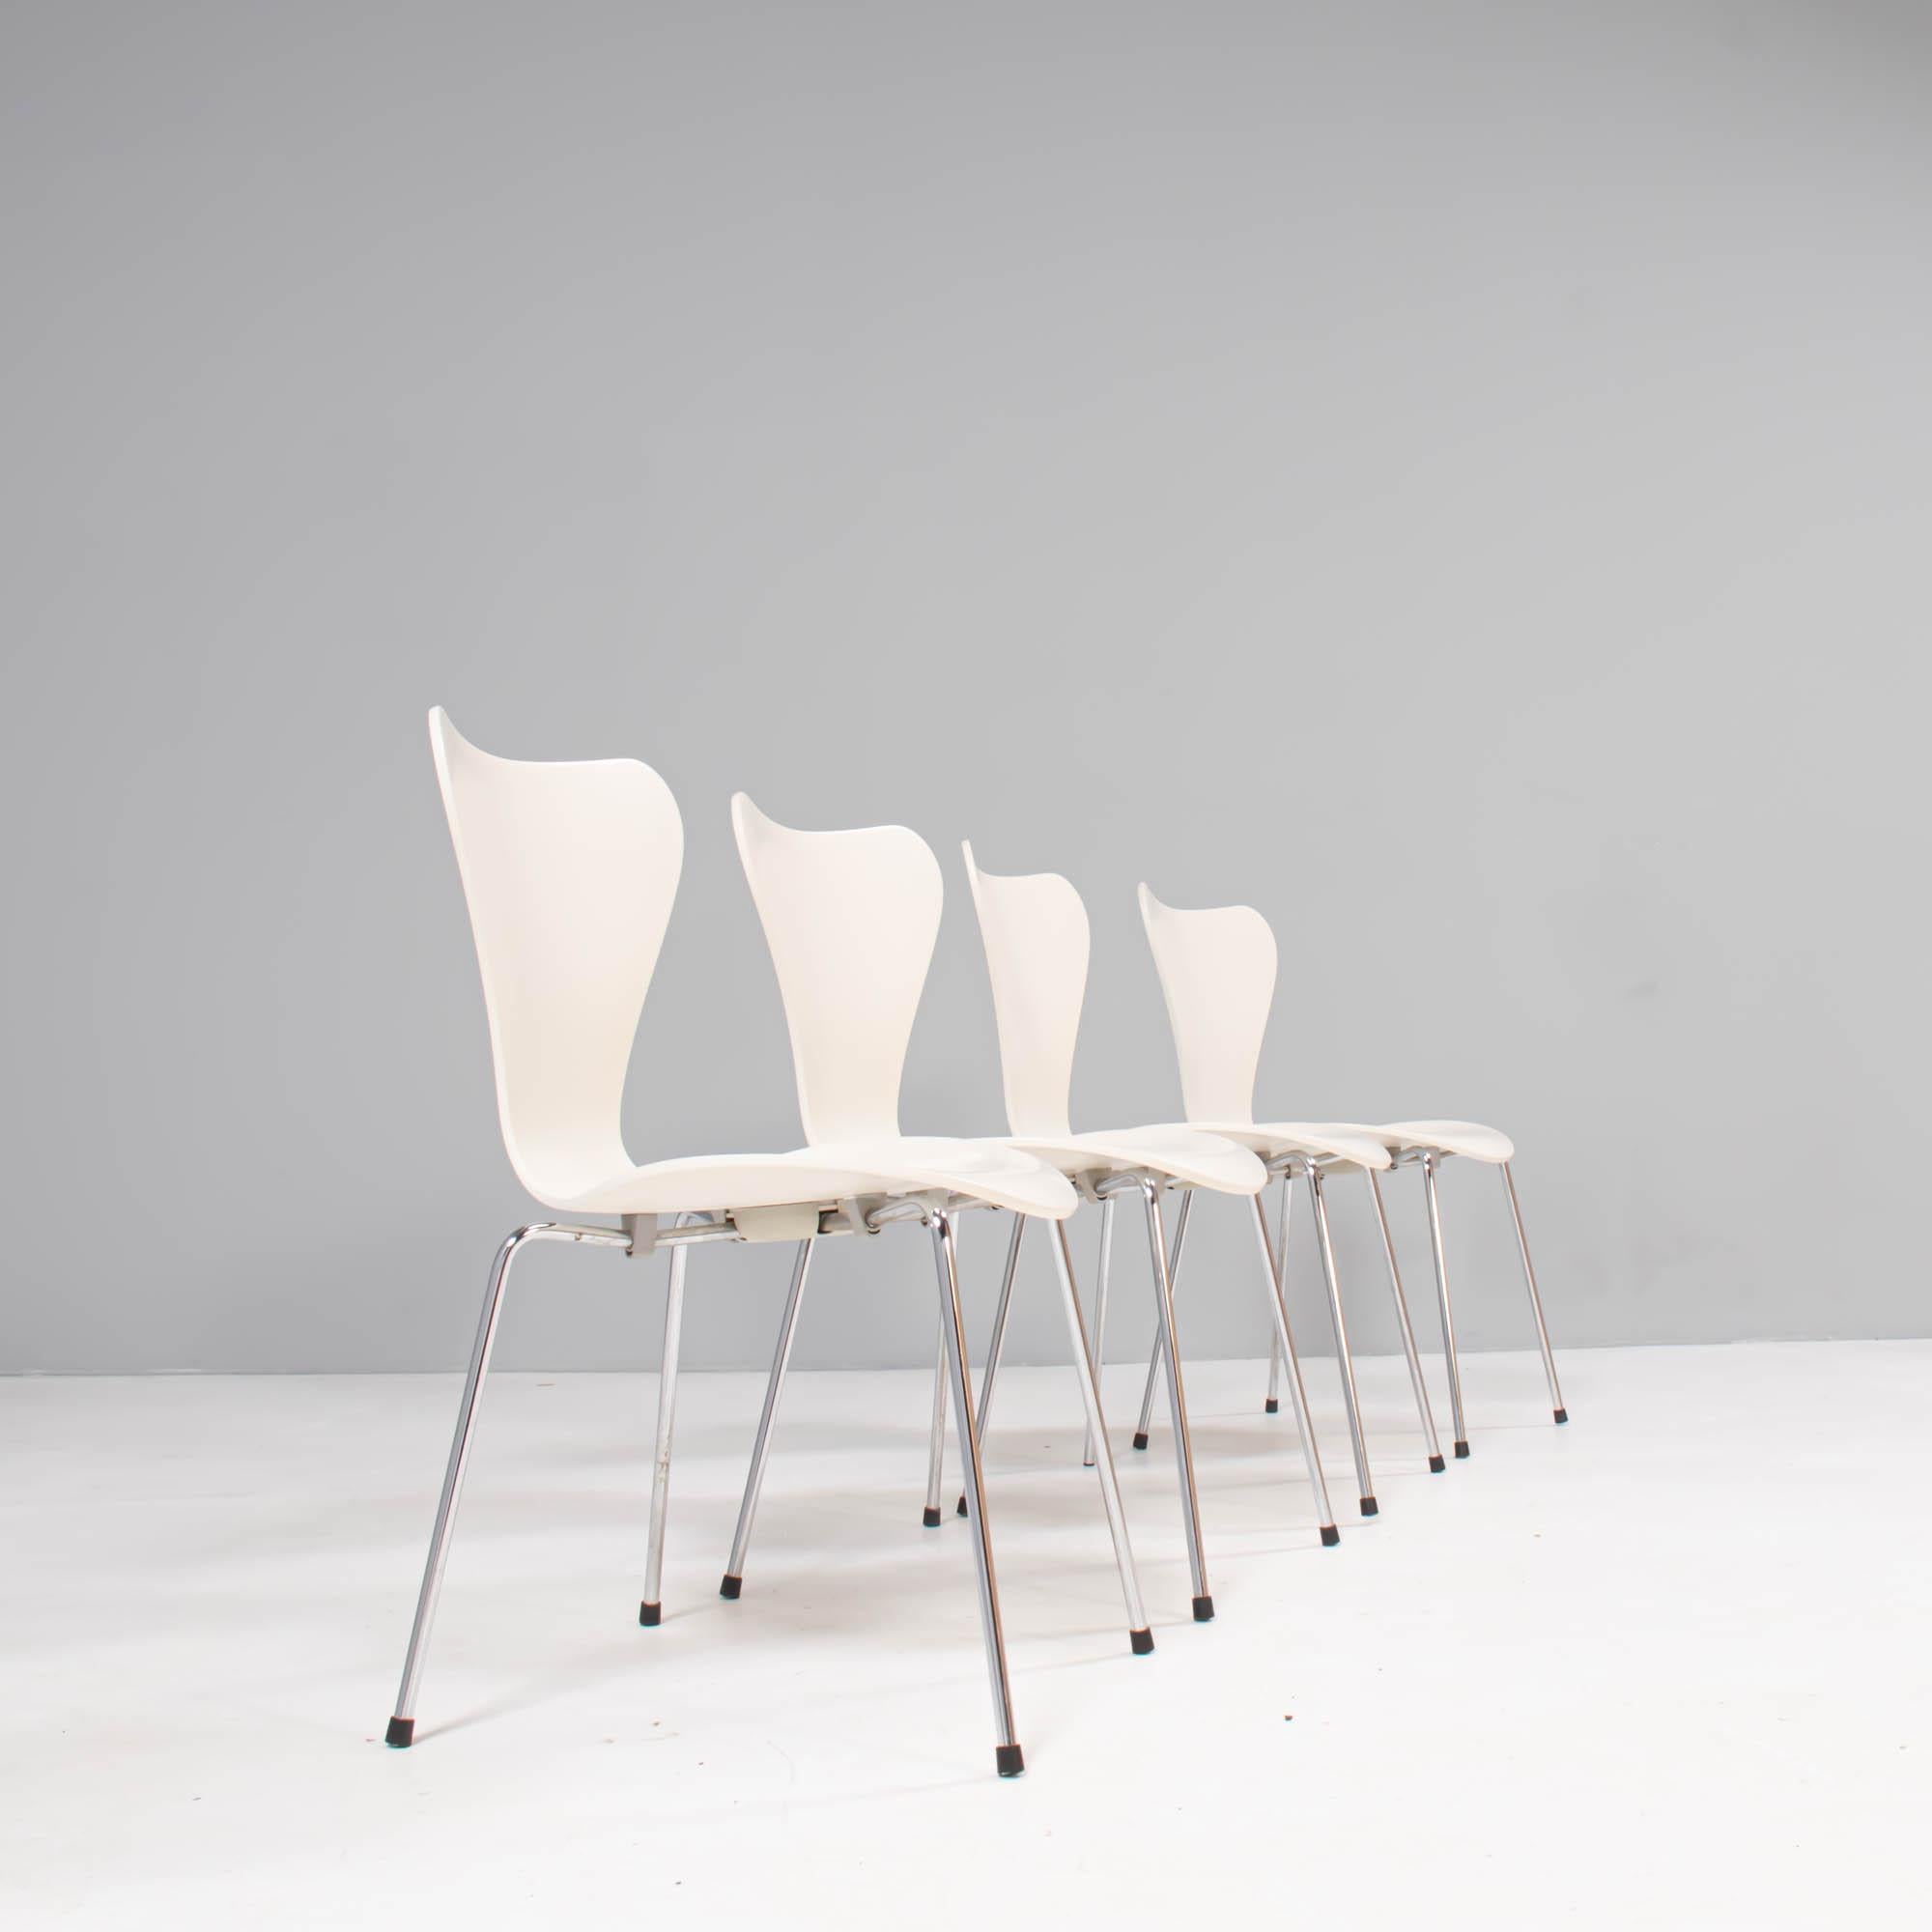 Originally designed by Arne Jacobsen in 1955, the Series 7 dining chair has been made by Fritz Hansen ever since. A true design icon, the Series 7 has become one of the best selling chairs in history.

Constructed from a pressure moulded veneer